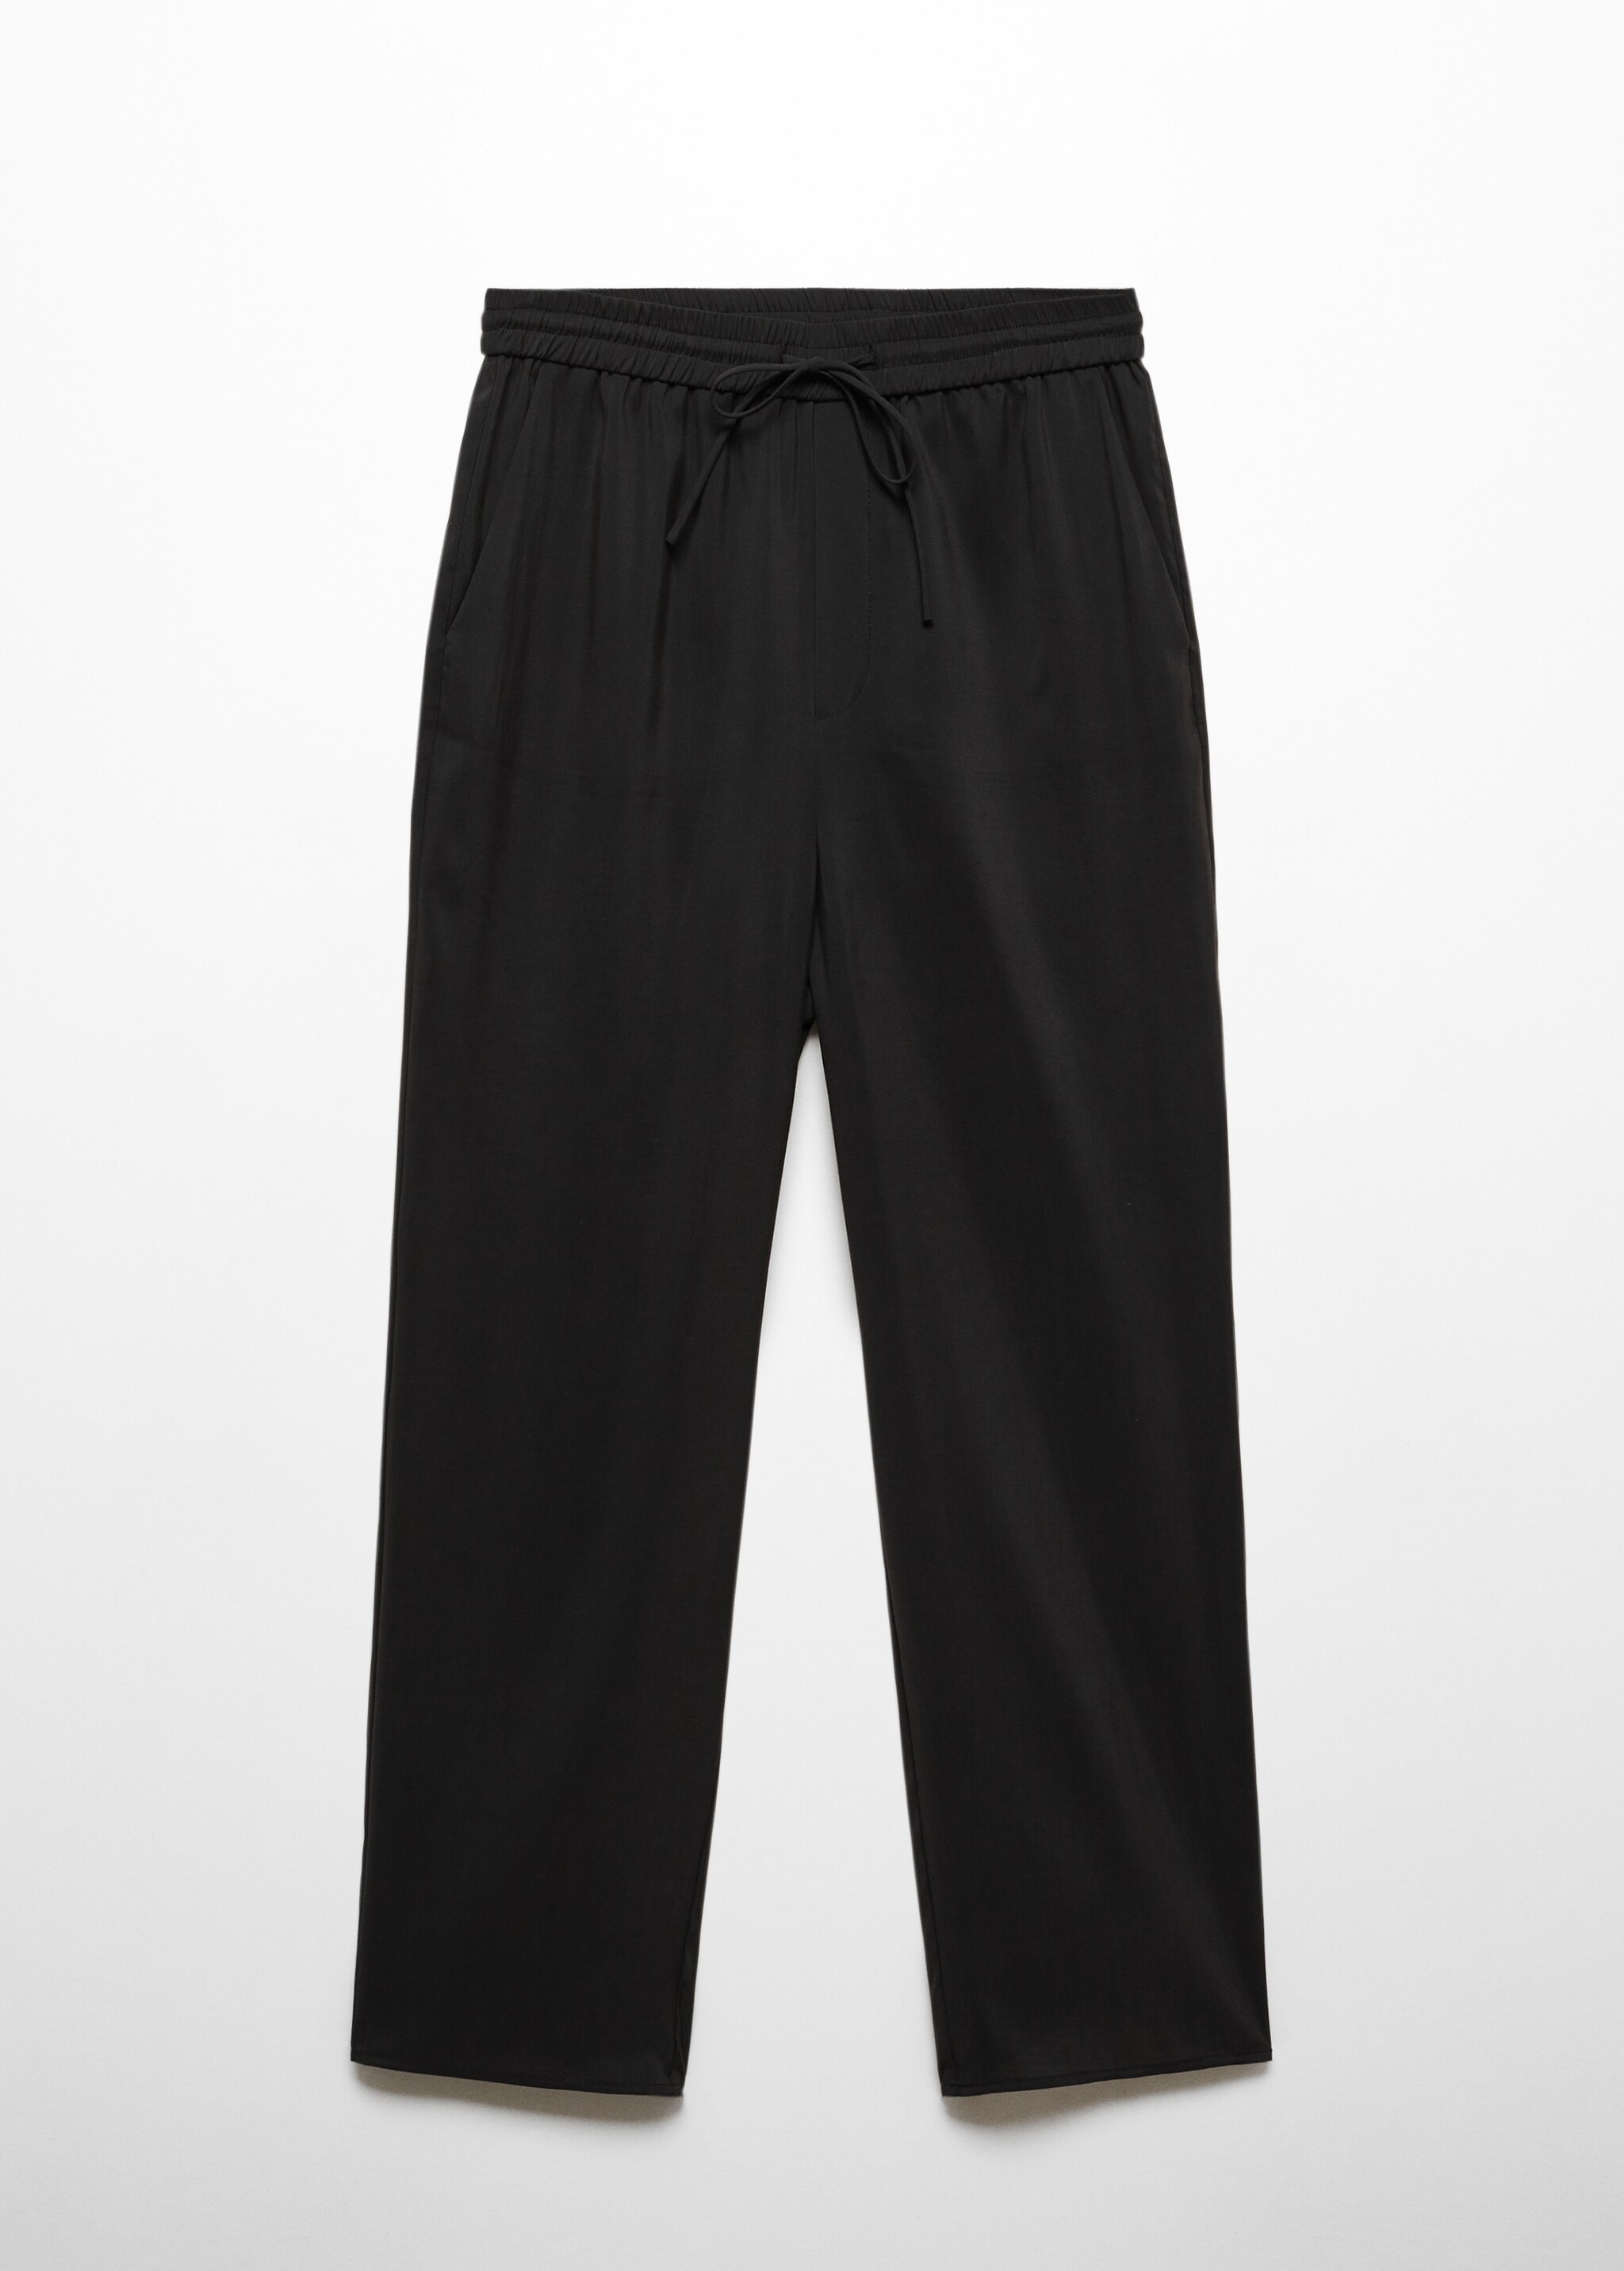 Drawstring waist modal trousers - Article without model